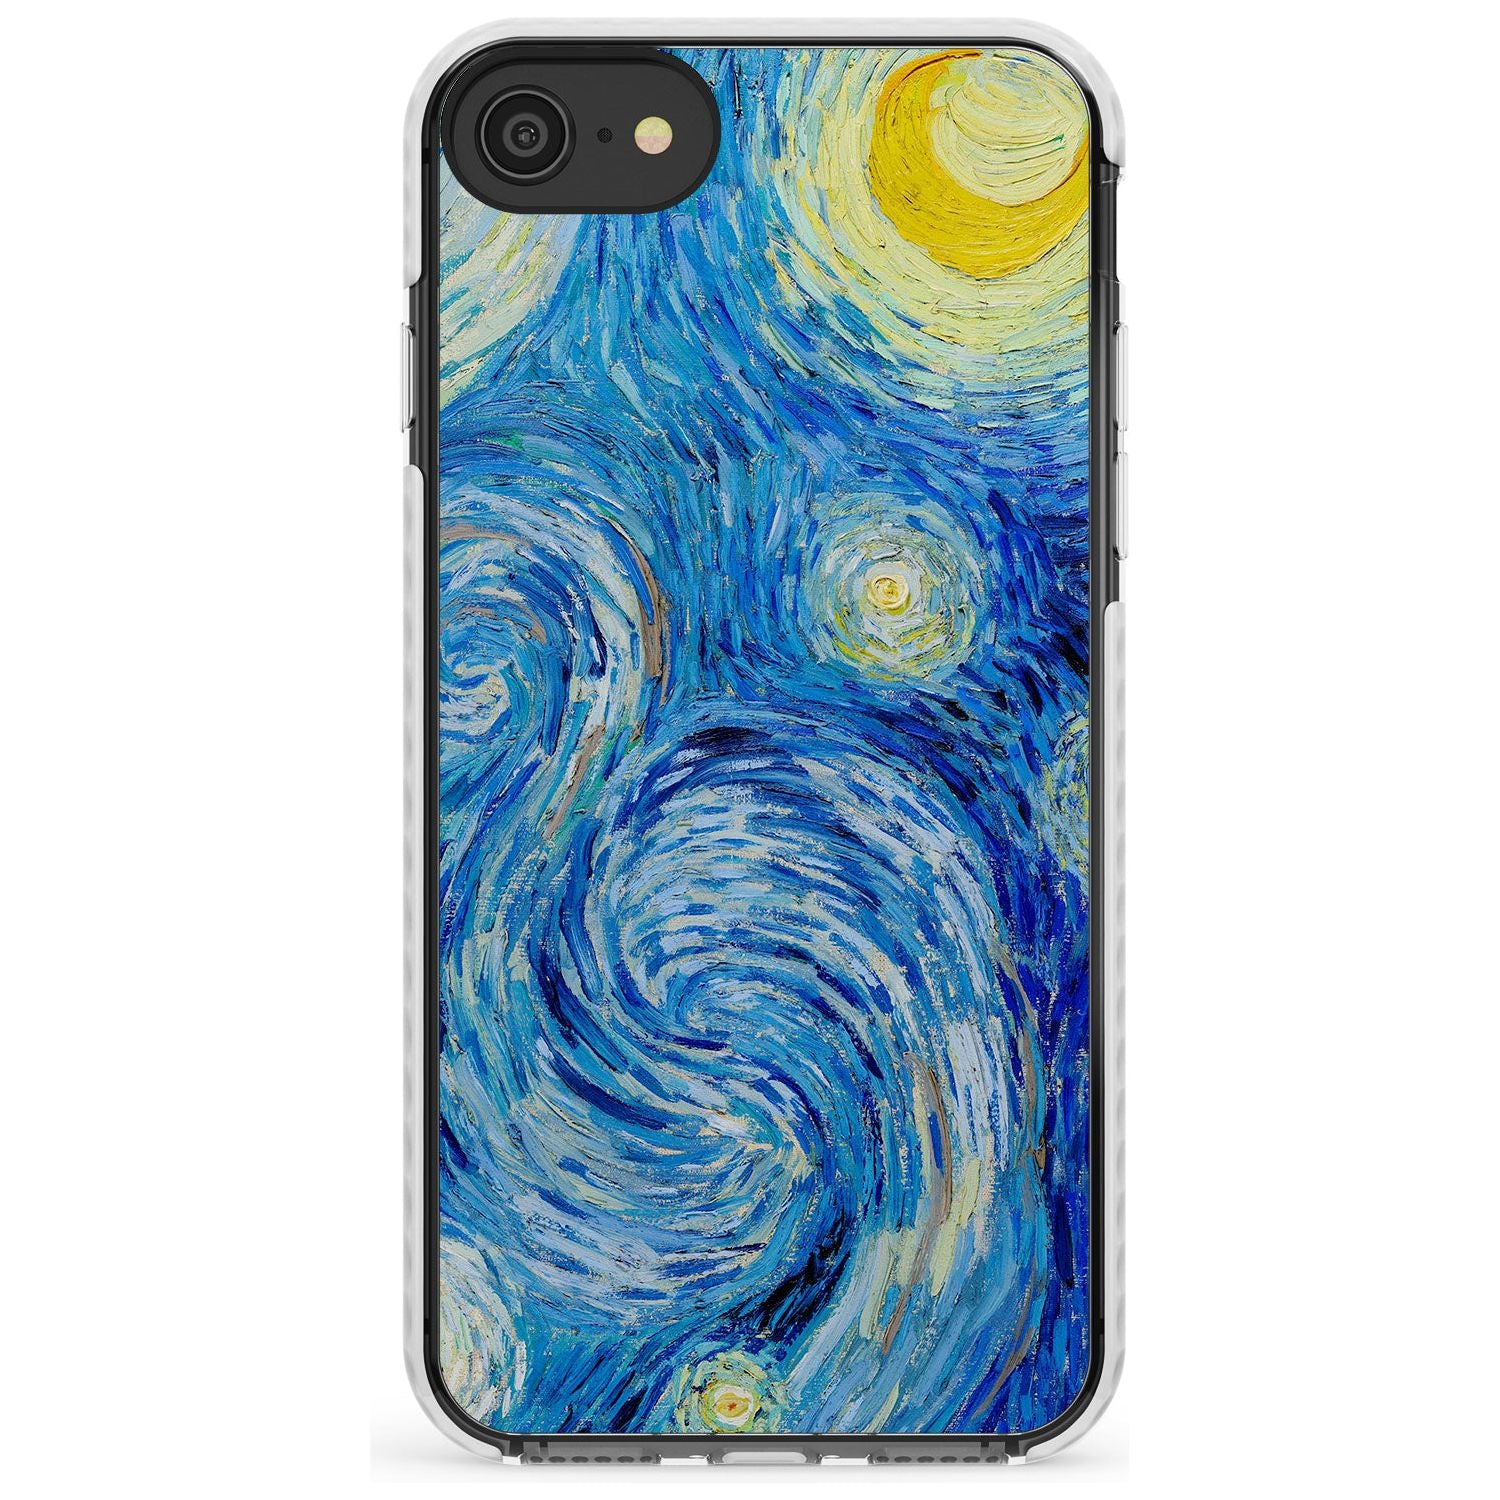 The Starry Night by Vincent Van Gogh Slim TPU Phone Case for iPhone SE 8 7 Plus